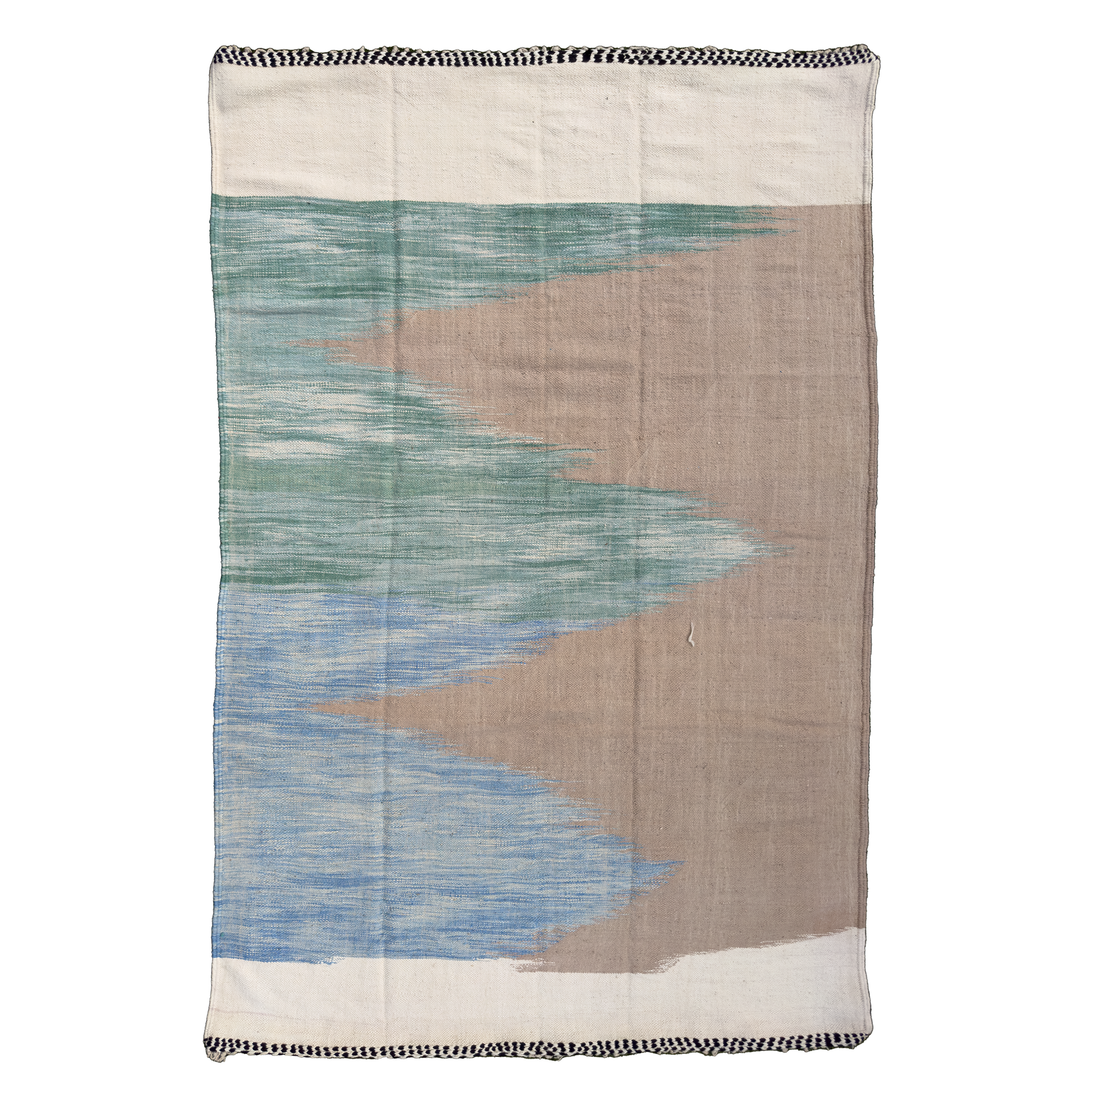 The design features a harmonious blend of sea green, sky blue, taupe, and cream colors, creating a sense of serenity and natural beauty. The rug&